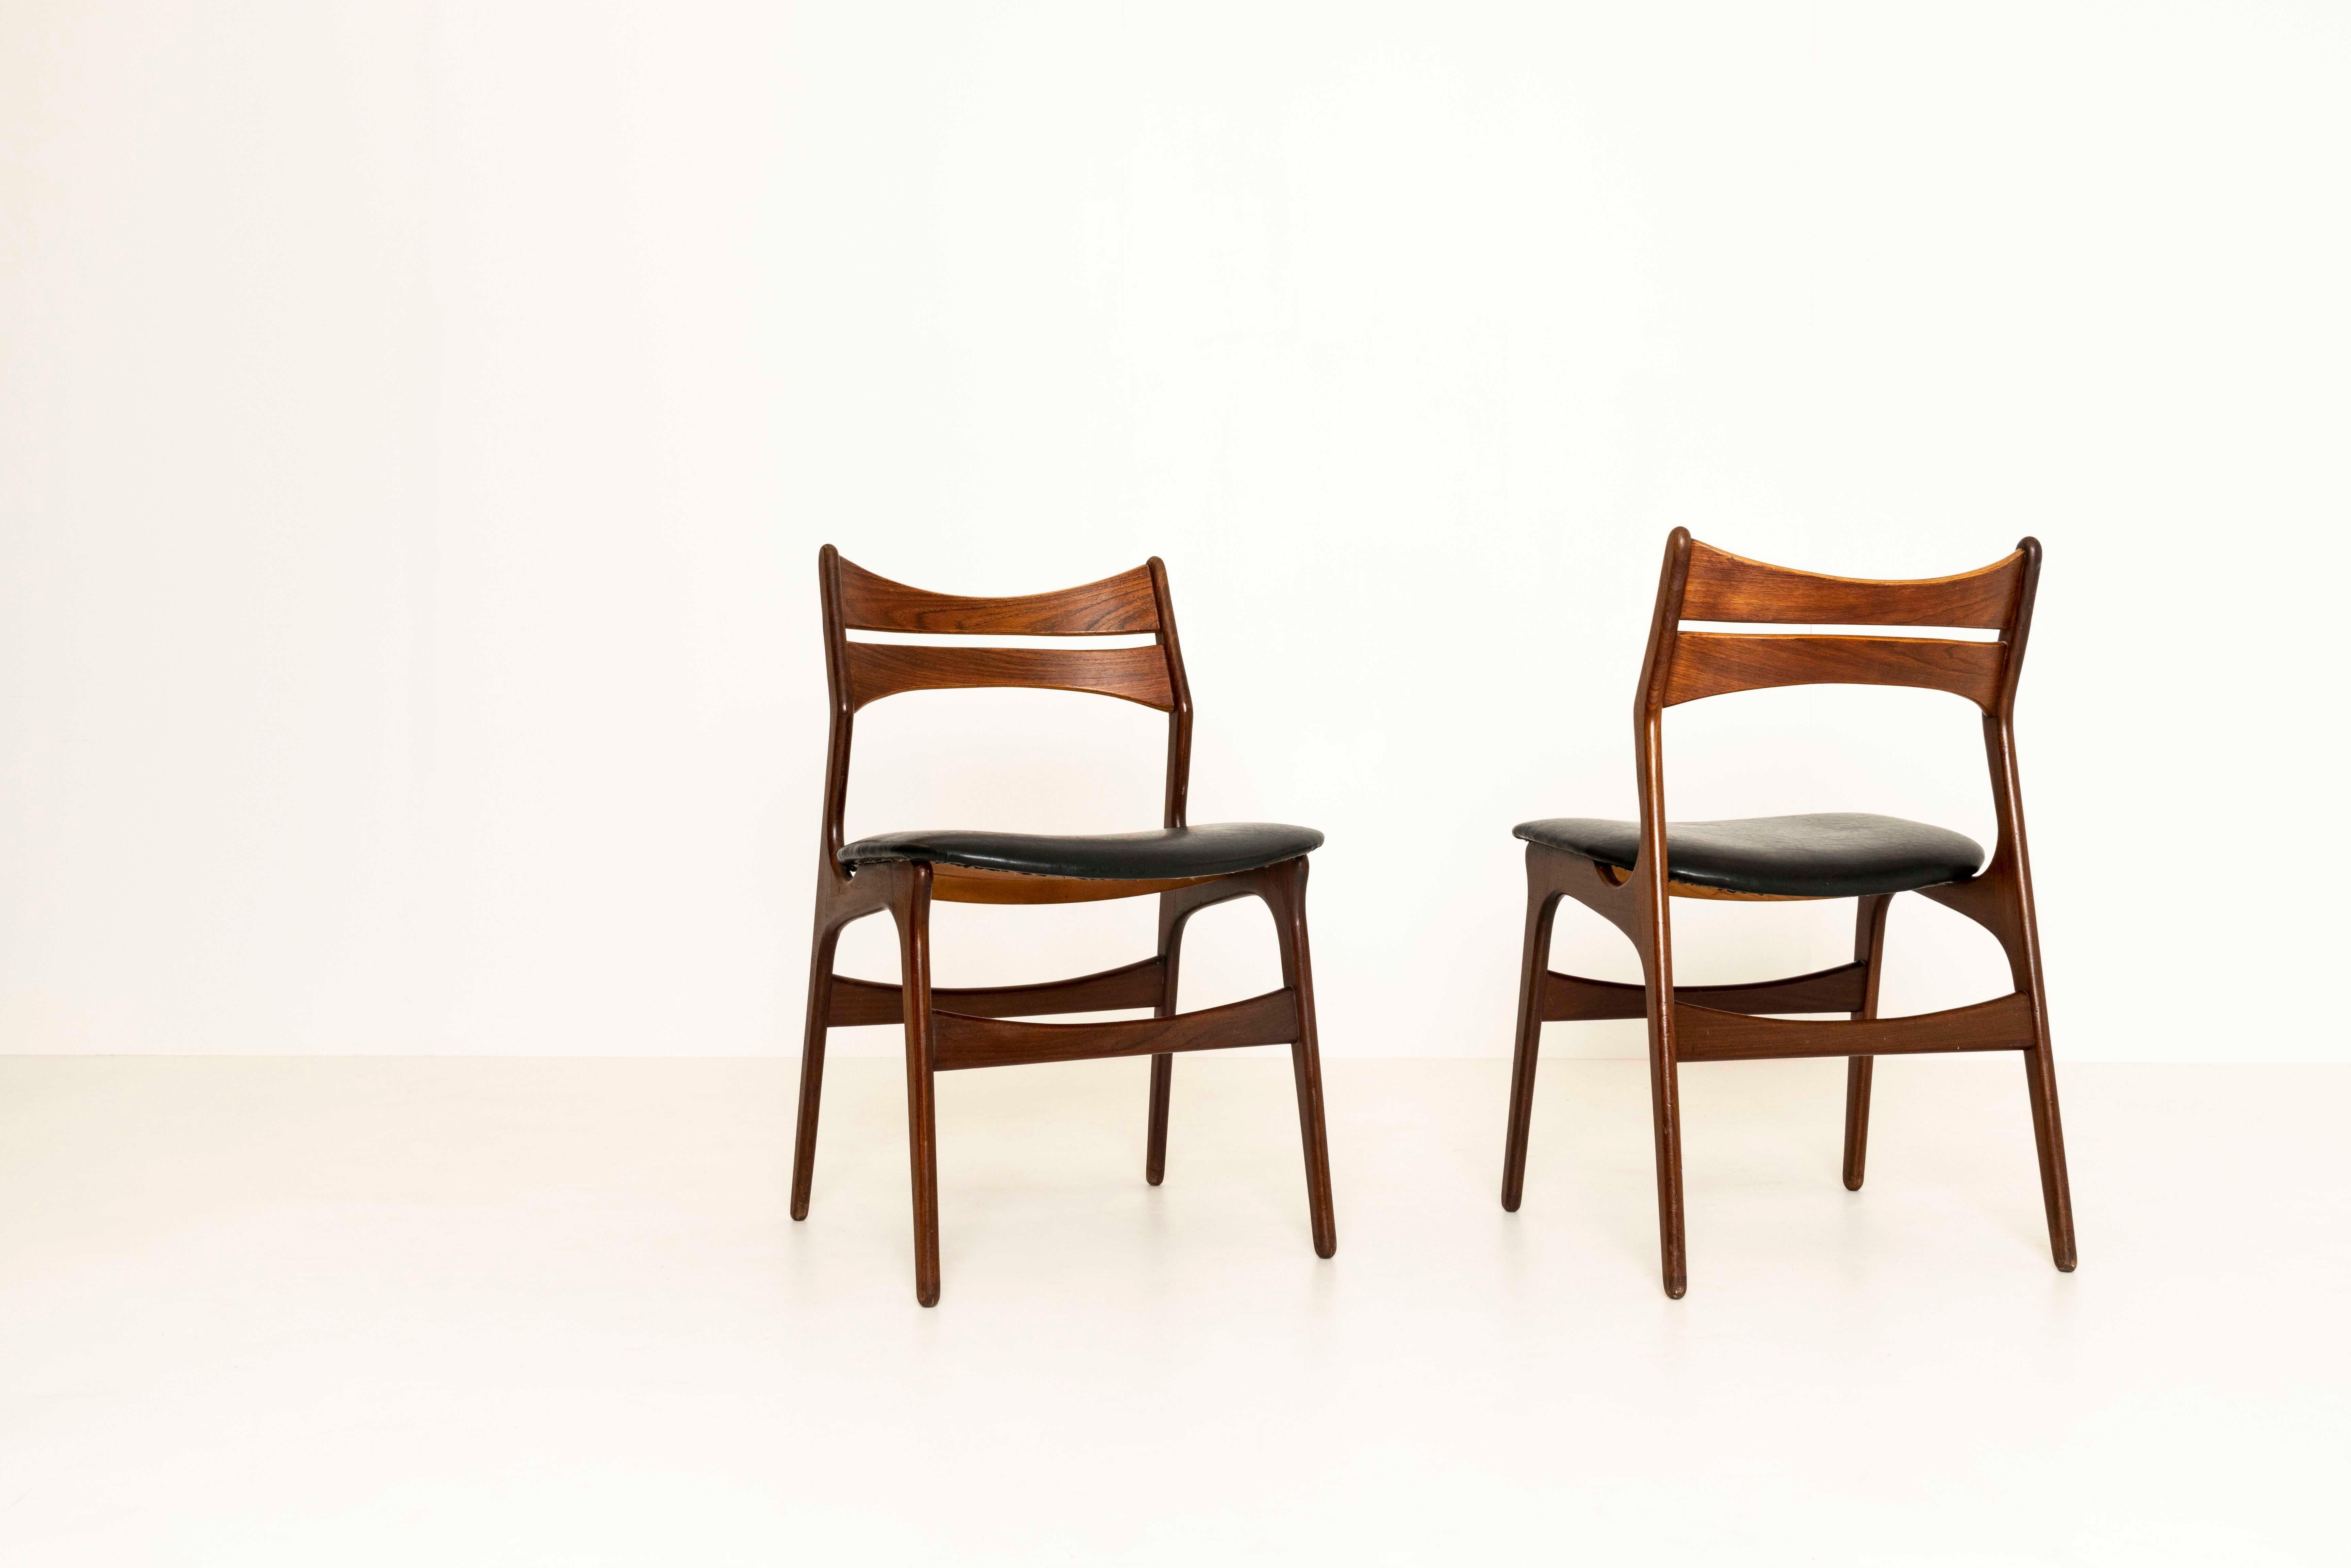 Beautiful set of four dining chairs by Erik Buch. This model 310 chair is produced for Christian Christensen in Denmark, ca 1960s. The chairs have a very interesting design, especially the backrest. The seating area is made of leather and the chairs